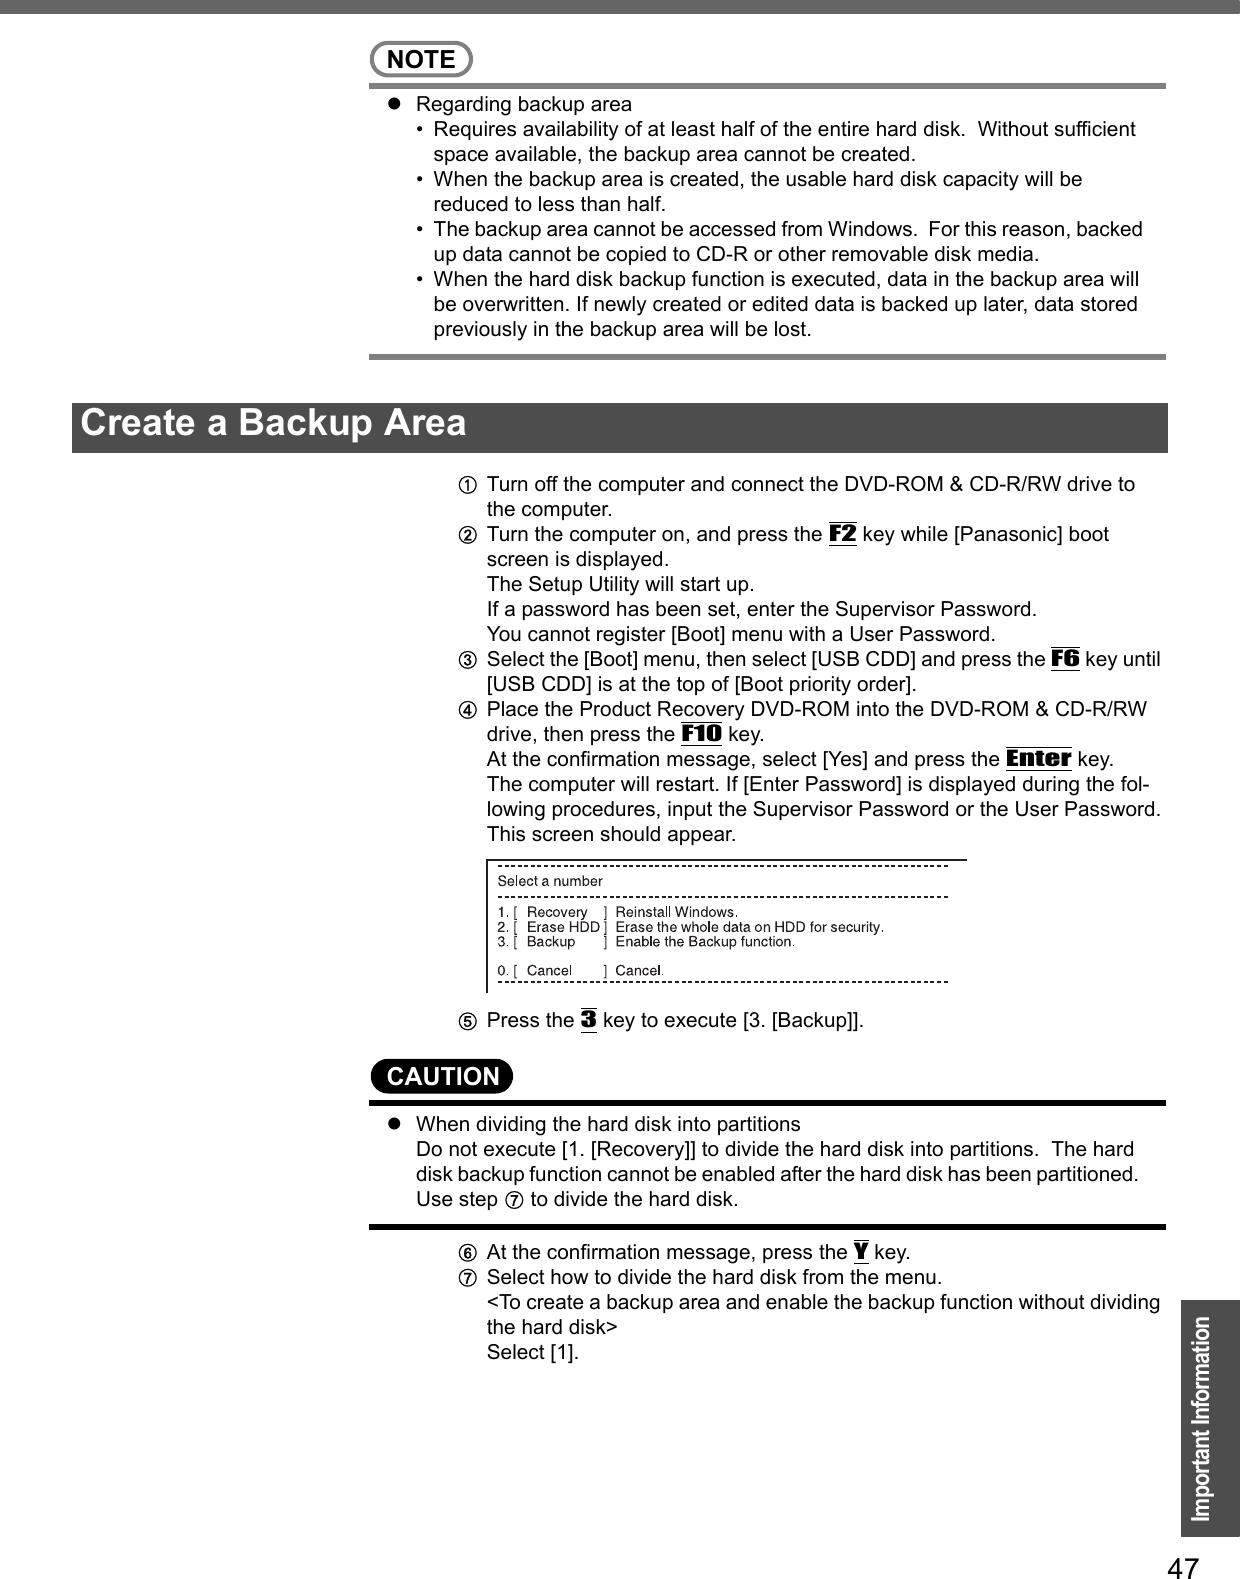 47Important InformationNOTEzRegarding backup area• Requires availability of at least half of the entire hard disk.  Without sufficient space available, the backup area cannot be created.• When the backup area is created, the usable hard disk capacity will be reduced to less than half.• The backup area cannot be accessed from Windows.  For this reason, backed up data cannot be copied to CD-R or other removable disk media.• When the hard disk backup function is executed, data in the backup area will be overwritten. If newly created or edited data is backed up later, data stored previously in the backup area will be lost.ATurn off the computer and connect the DVD-ROM &amp; CD-R/RW drive to the computer.BTurn the computer on, and press the F2 key while [Panasonic] boot screen is displayed.The Setup Utility will start up.If a password has been set, enter the Supervisor Password.You cannot register [Boot] menu with a User Password.CSelect the [Boot] menu, then select [USB CDD] and press the F6 key until [USB CDD] is at the top of [Boot priority order].DPlace the Product Recovery DVD-ROM into the DVD-ROM &amp; CD-R/RW drive, then press the F10 key.At the confirmation message, select [Yes] and press the Enter key.The computer will restart. If [Enter Password] is displayed during the fol-lowing procedures, input the Supervisor Password or the User Password.This screen should appear.EPress the 3 key to execute [3. [Backup]].CAUTIONzWhen dividing the hard disk into partitions Do not execute [1. [Recovery]] to divide the hard disk into partitions.  The hard disk backup function cannot be enabled after the hard disk has been partitioned.  Use step G to divide the hard disk.FAt the confirmation message, press the Y key.GSelect how to divide the hard disk from the menu.&lt;To create a backup area and enable the backup function without dividing the hard disk&gt;Select [1].Create a Backup Area